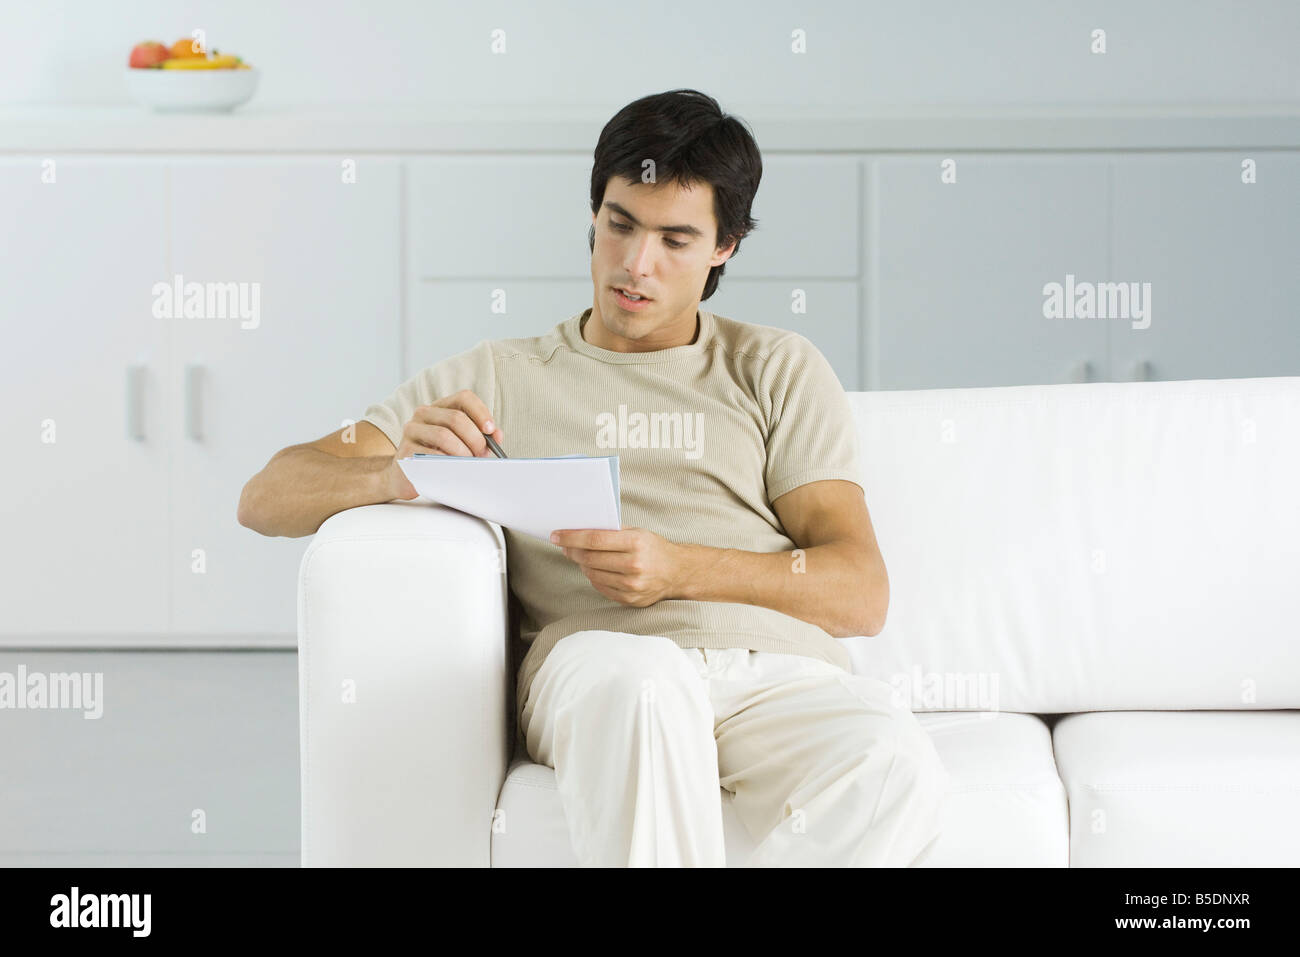 Man sitting on couch, reading document, holding pen Stock Photo